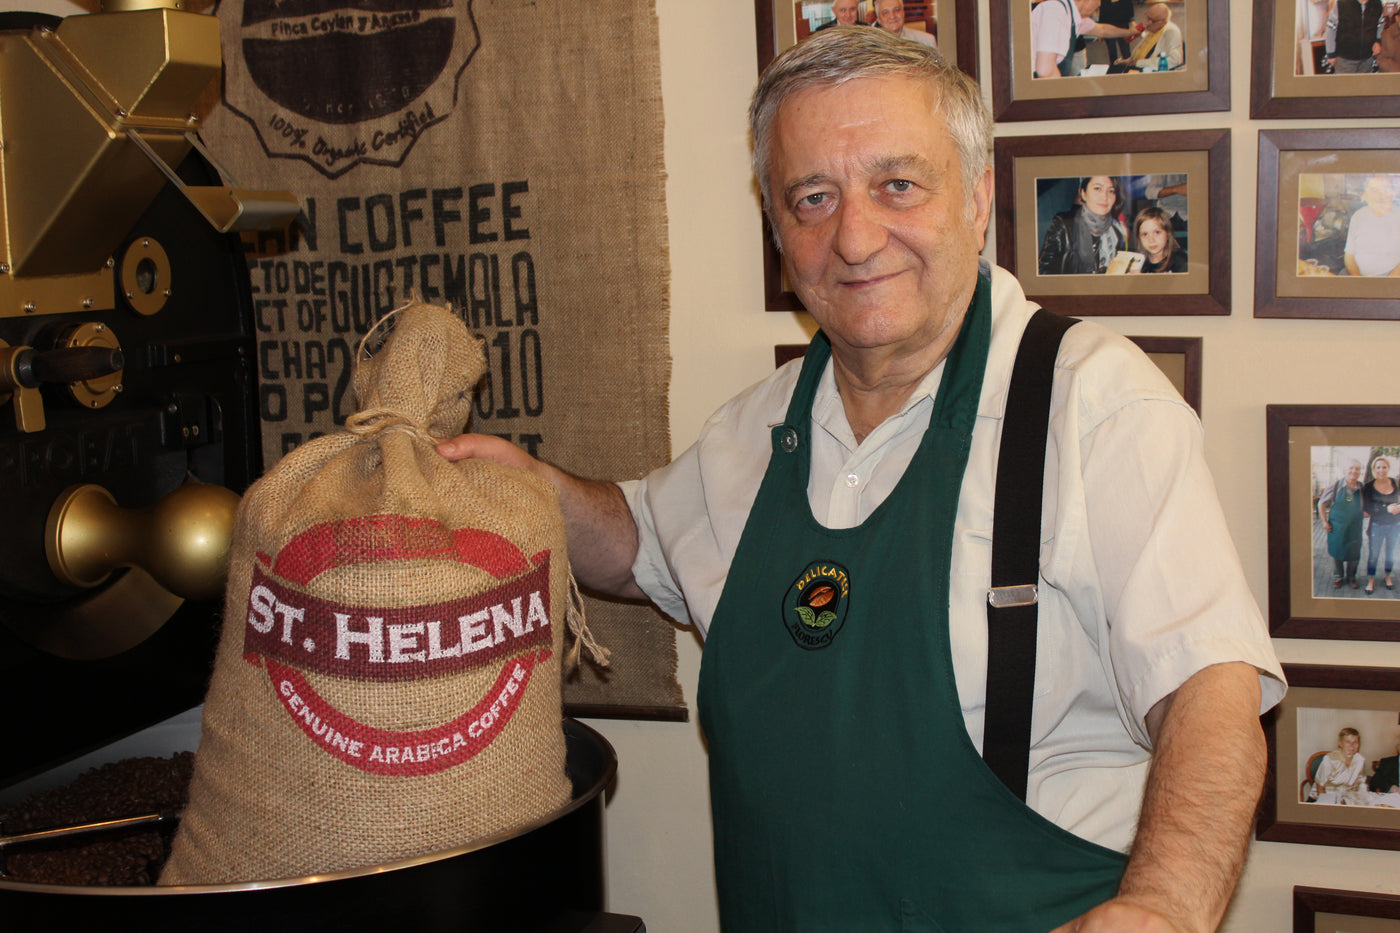 St Helena coffee farmer holding a bag of unroasted coffee beans